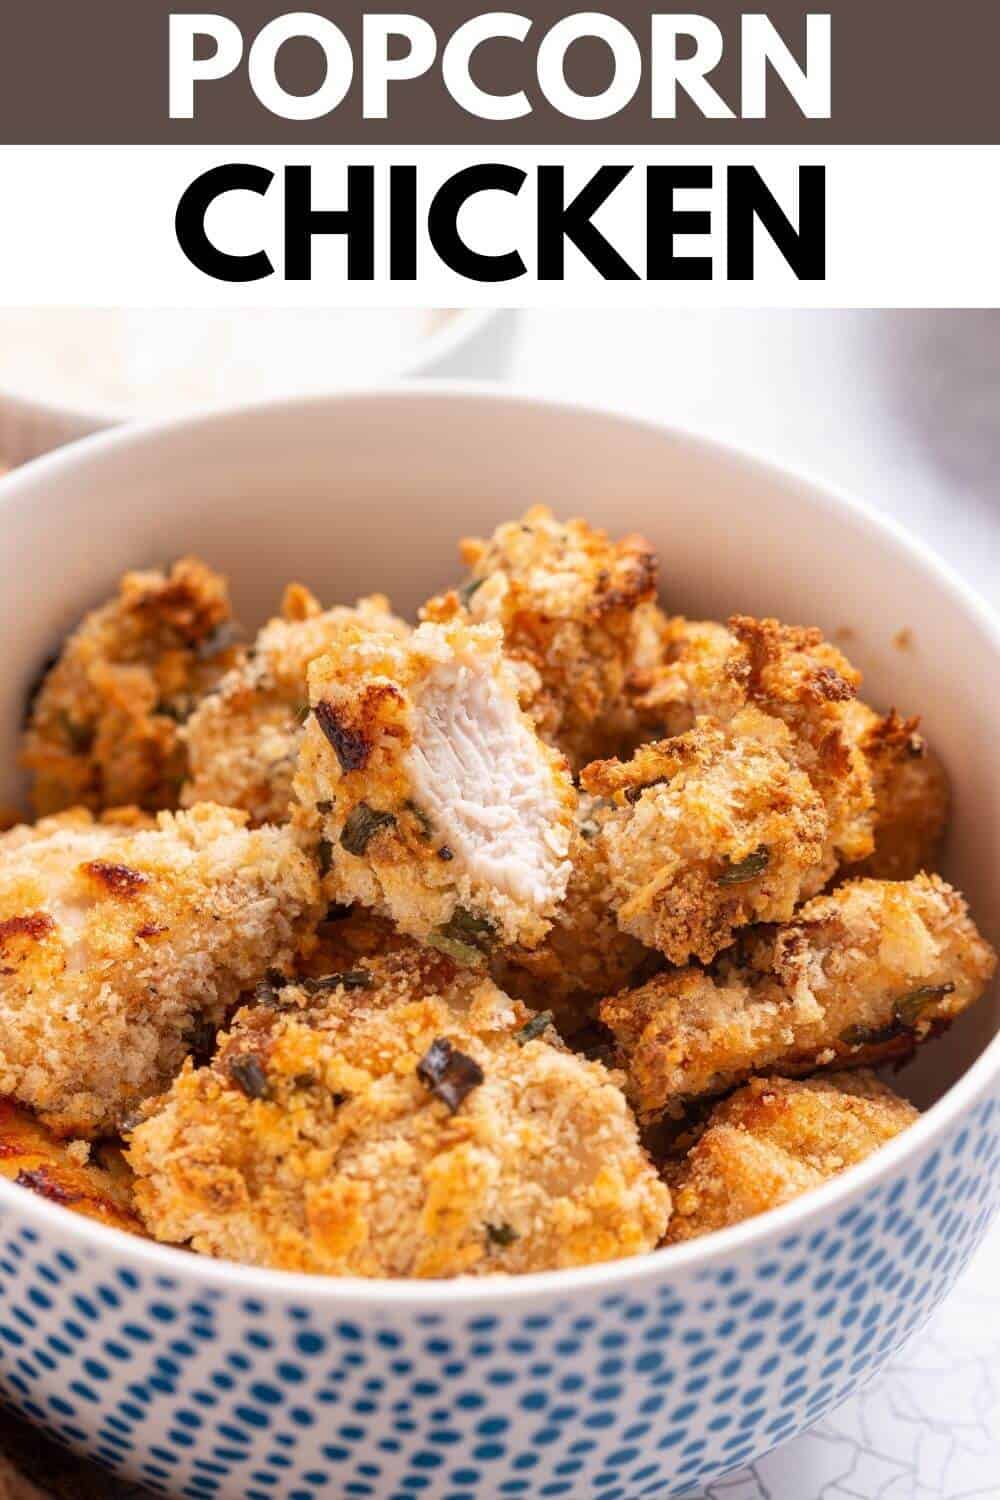 Popcorn chicken in bowl with title text overlay.